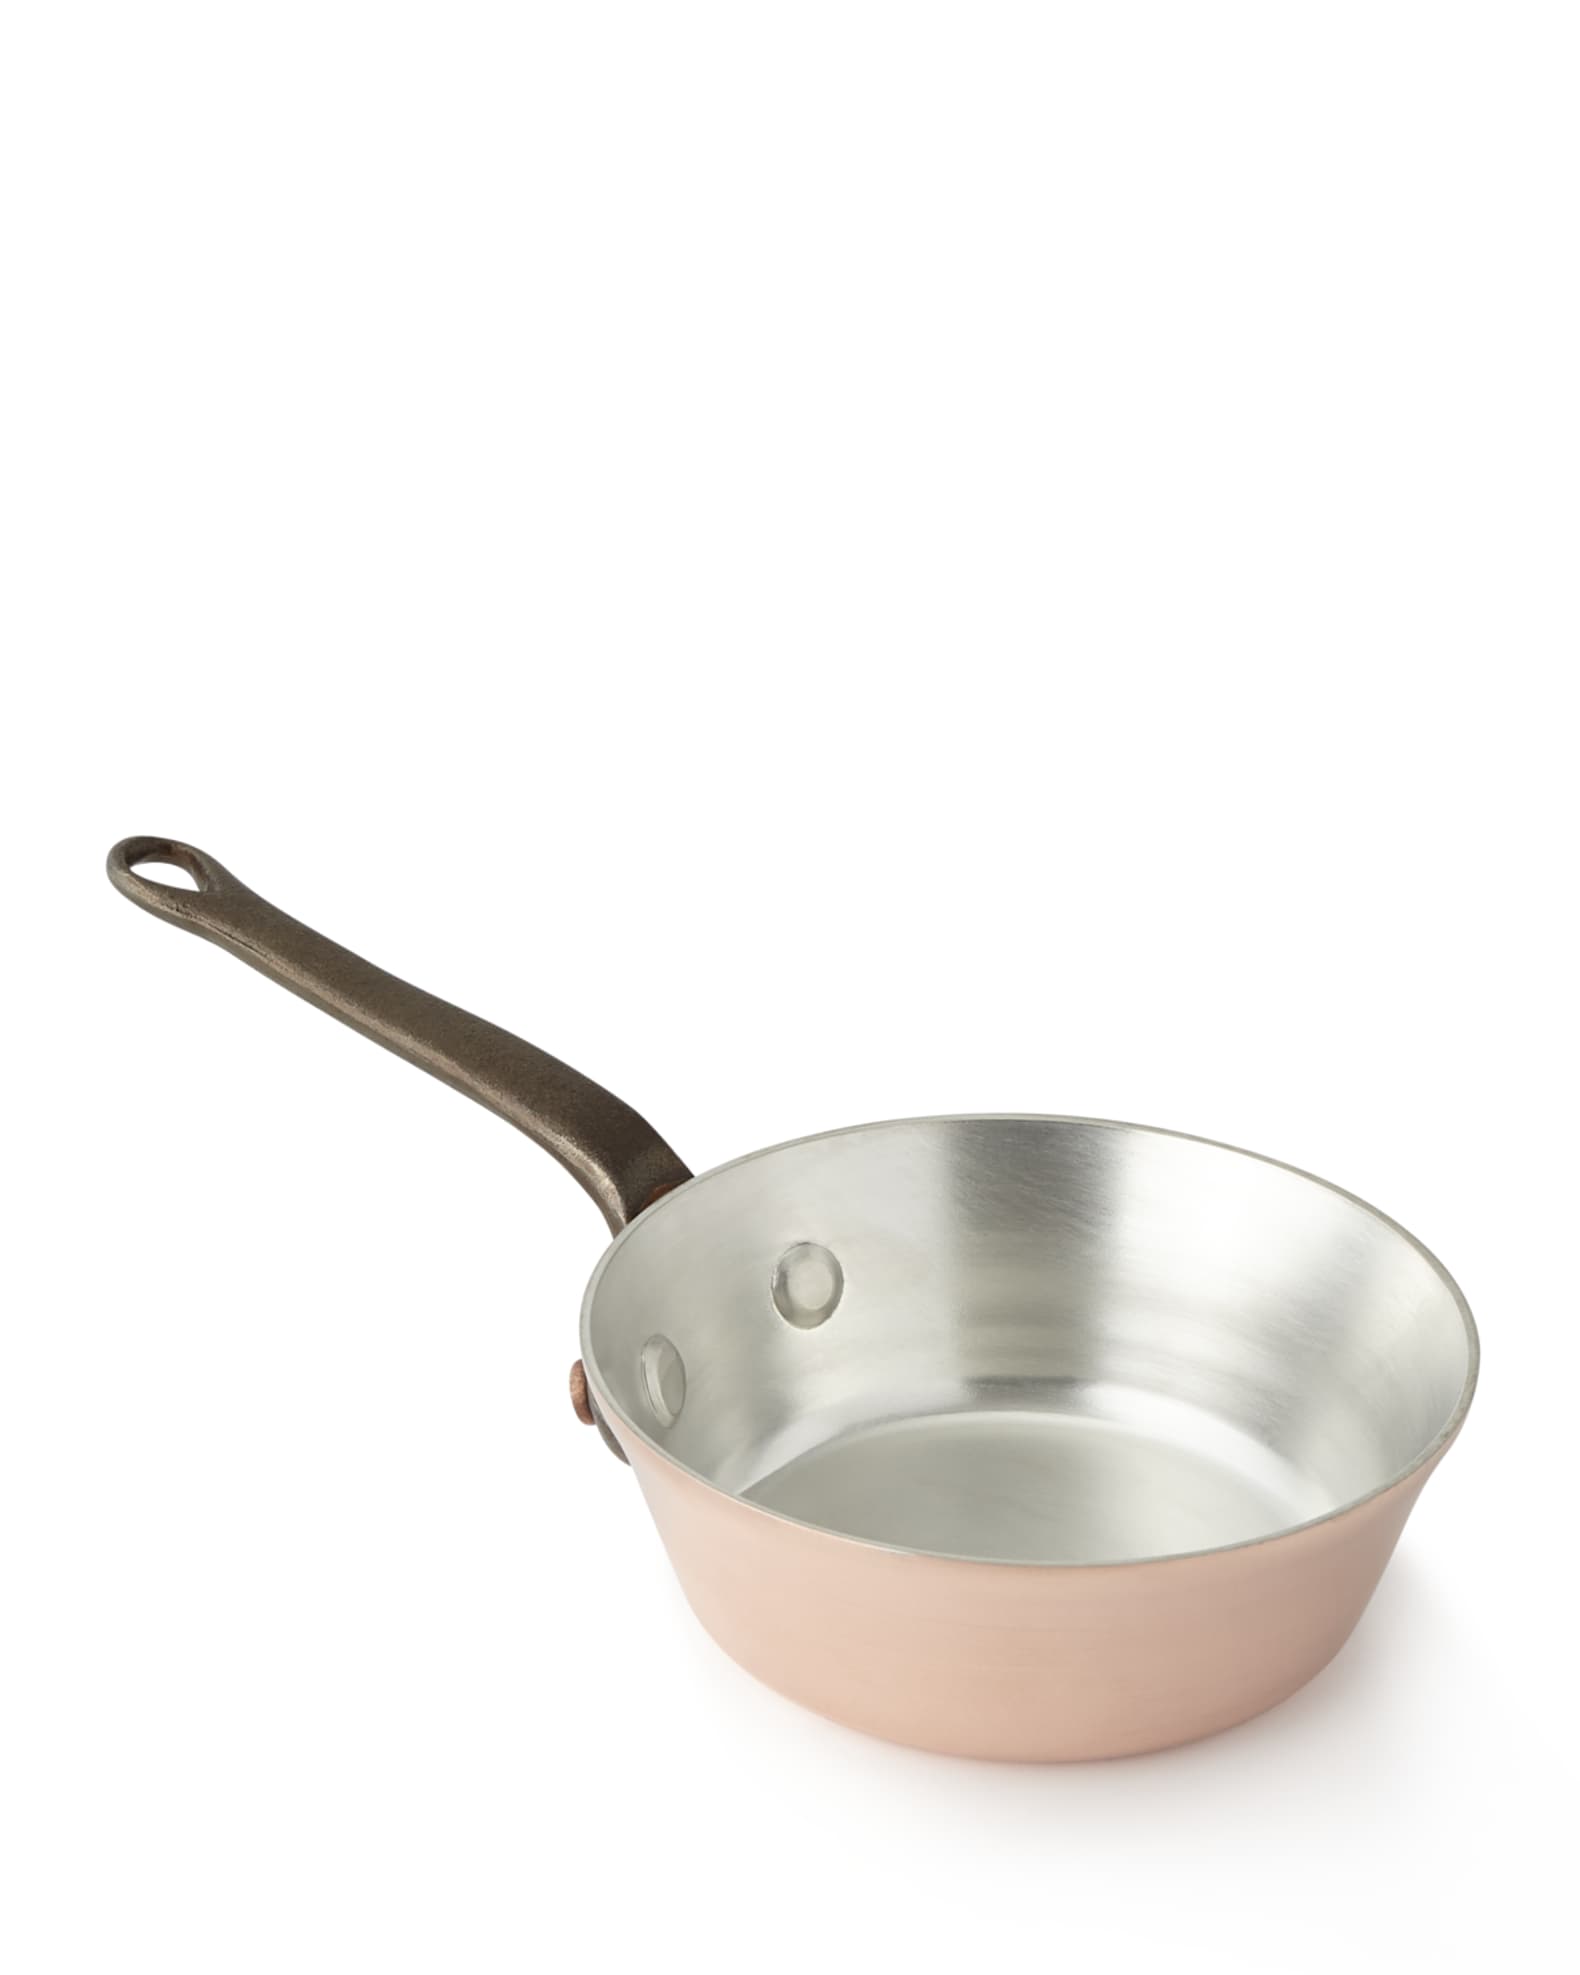 Duparquet Copper Cookware Solid Copper Silver-Lined Pans, Set of 5